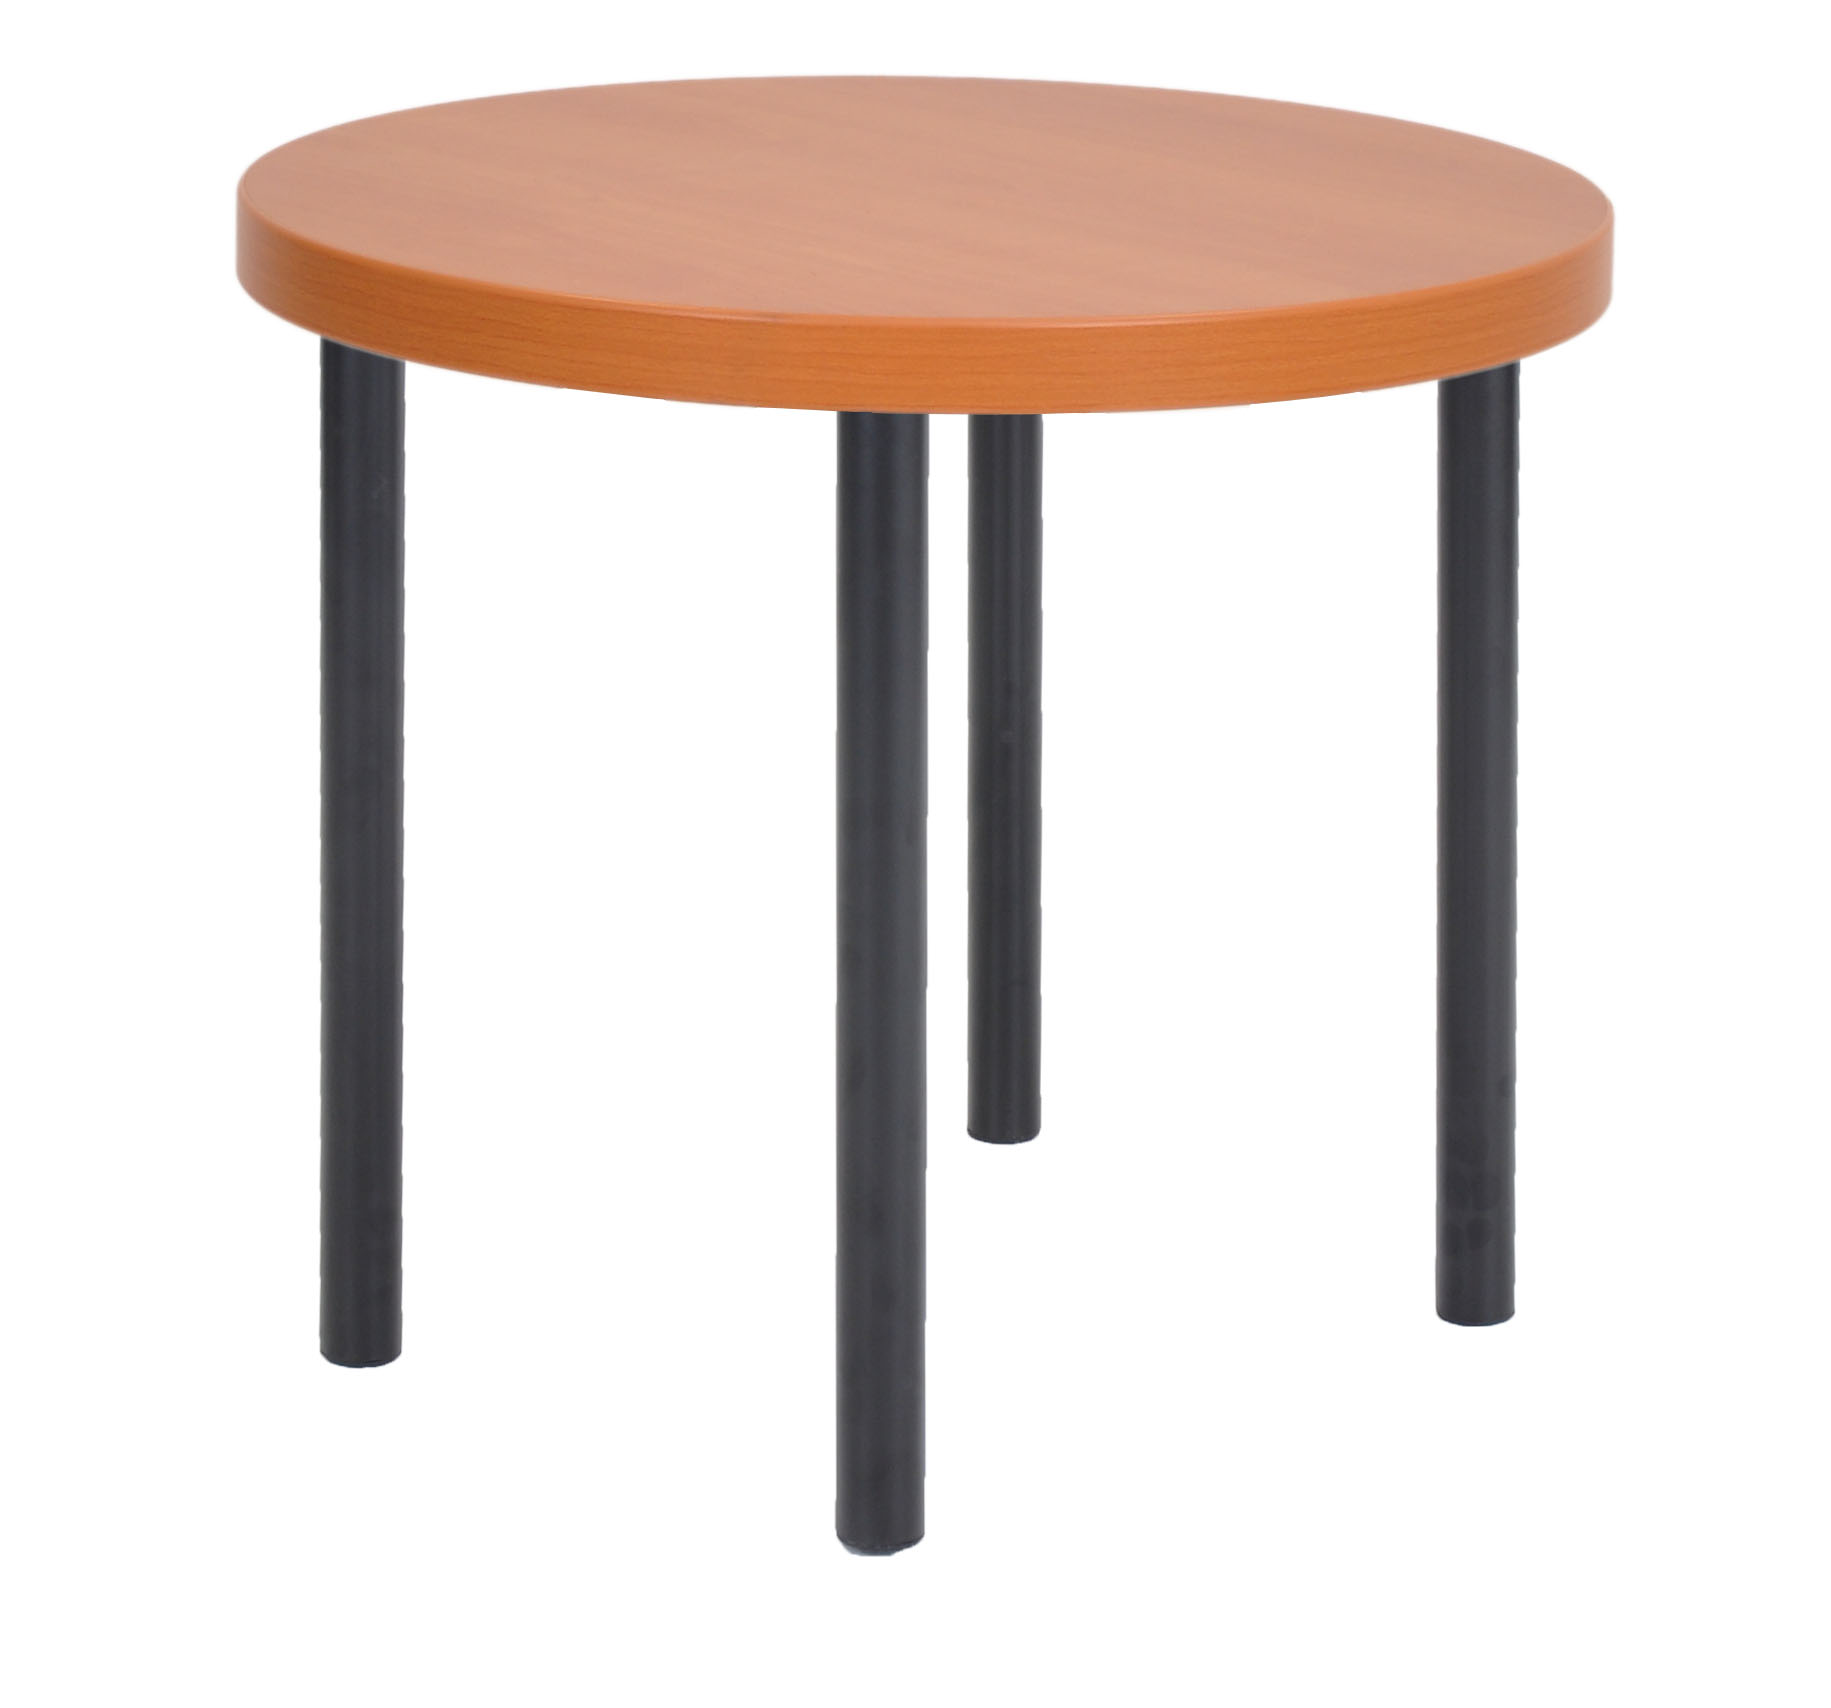 Make Space Round Tables